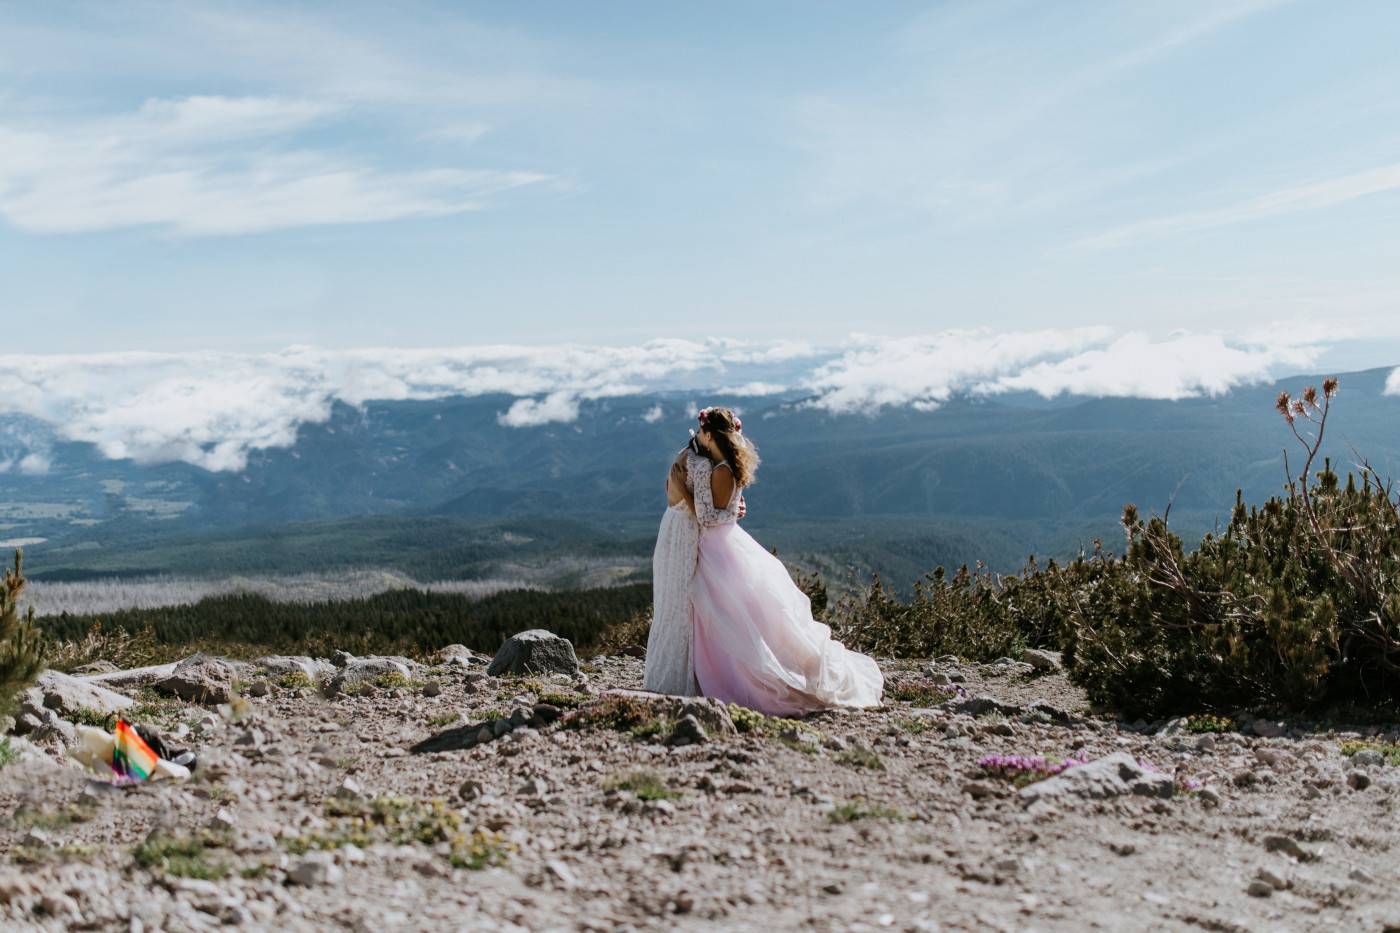 Heather and Margaux hugging. Elopement photography at Mount Hood by Sienna Plus Josh.